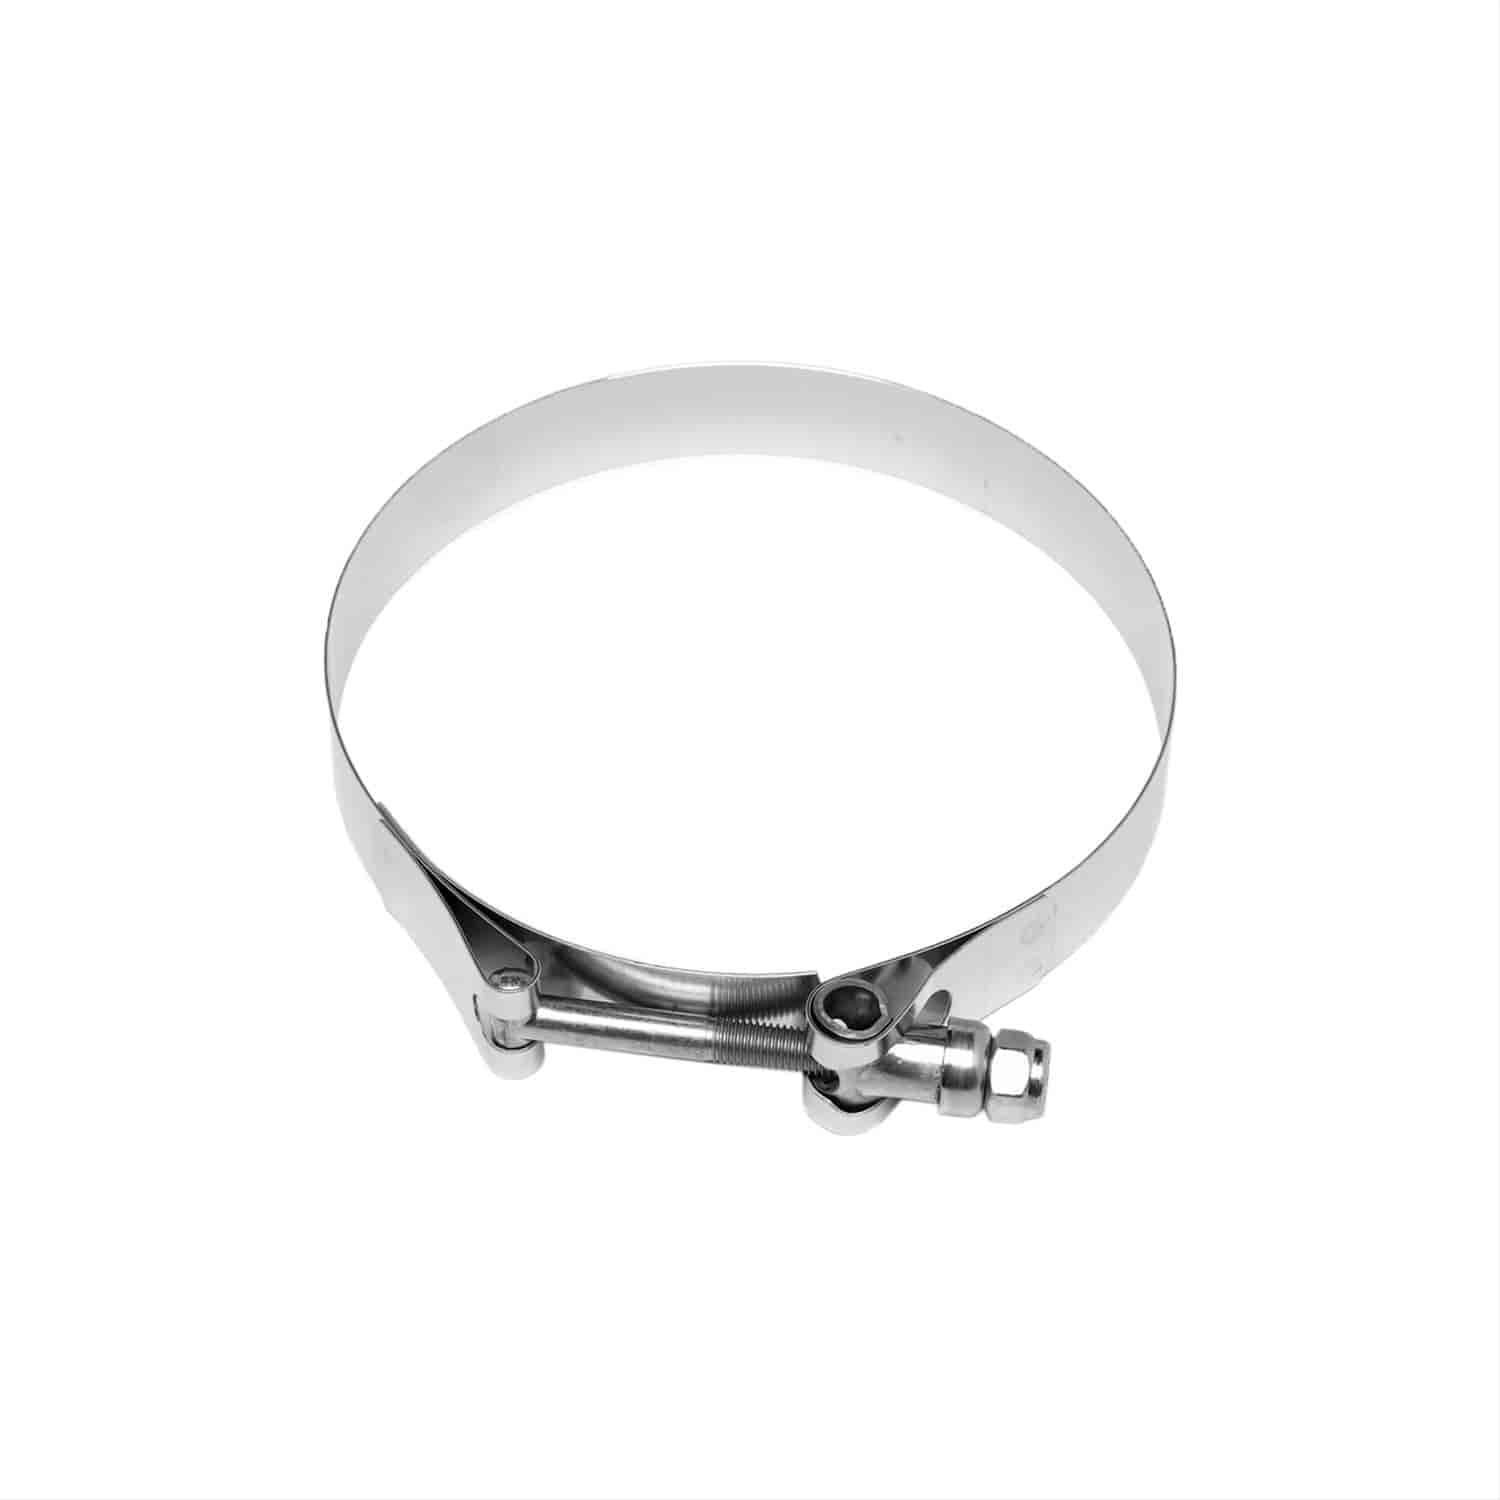 Exhaust AIR LINE CLAMP-STAINLESS